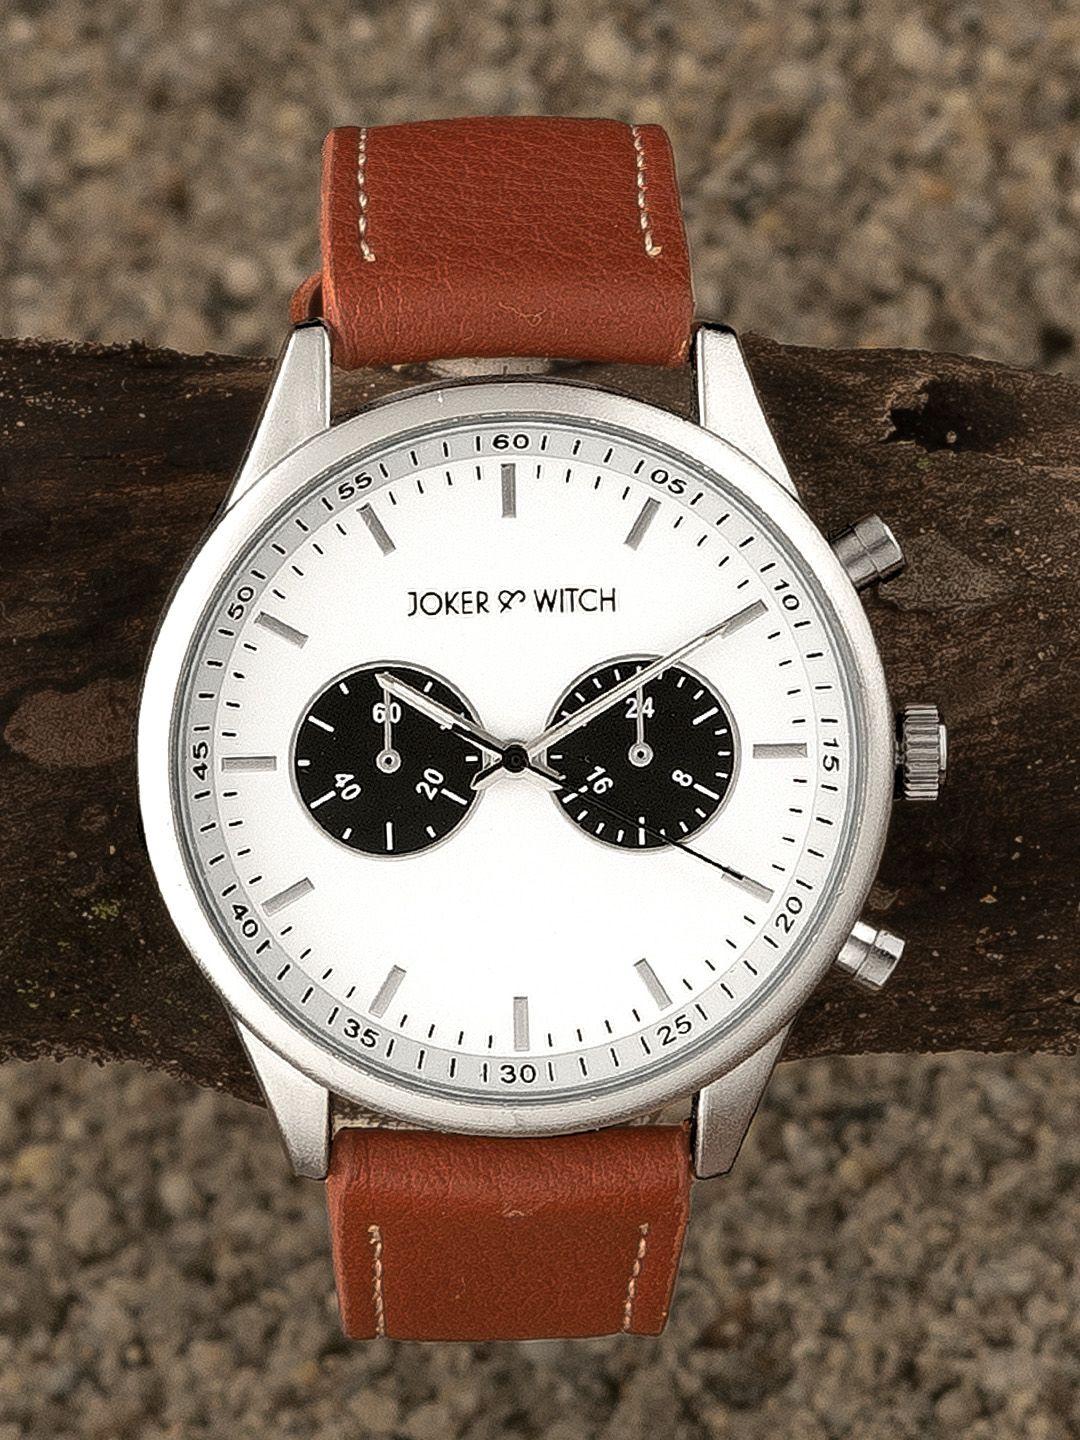 joker-&-witch-men-white-embellished-dial-&-brown-leather-bracelet-style-straps-analogue-watch-amww495-brown